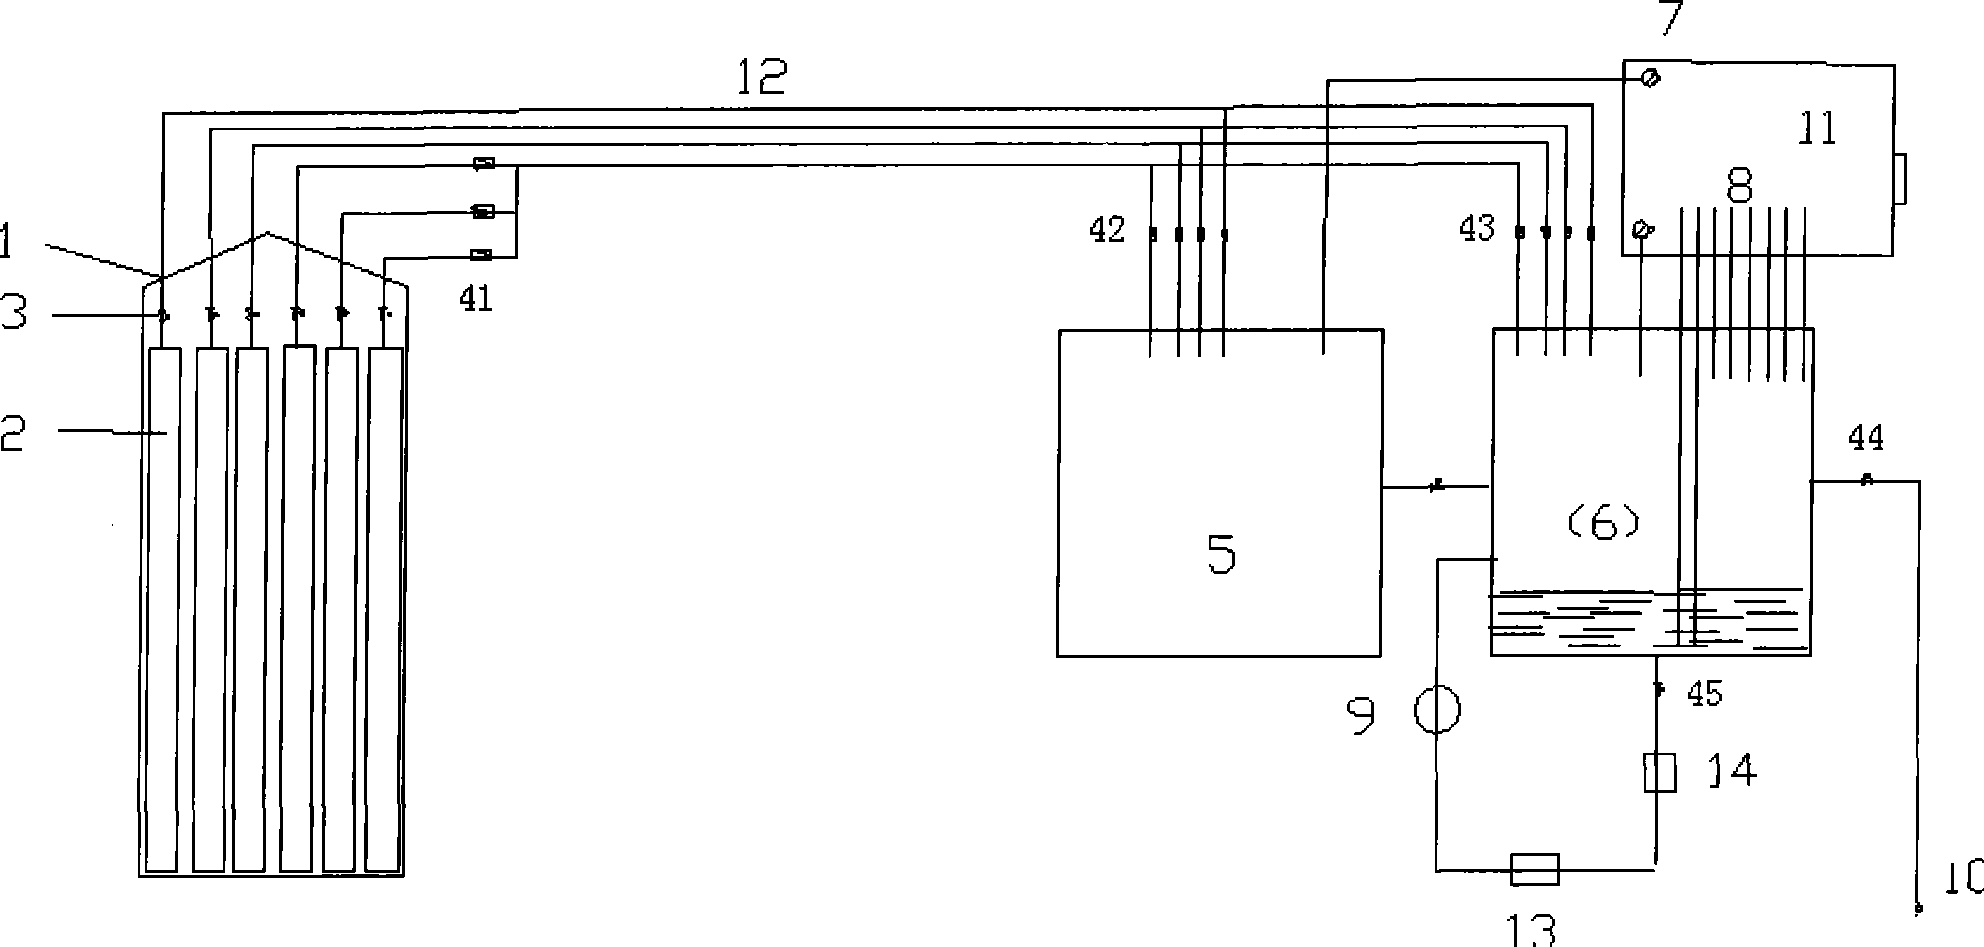 Blood-gas reaction monitoring and control device